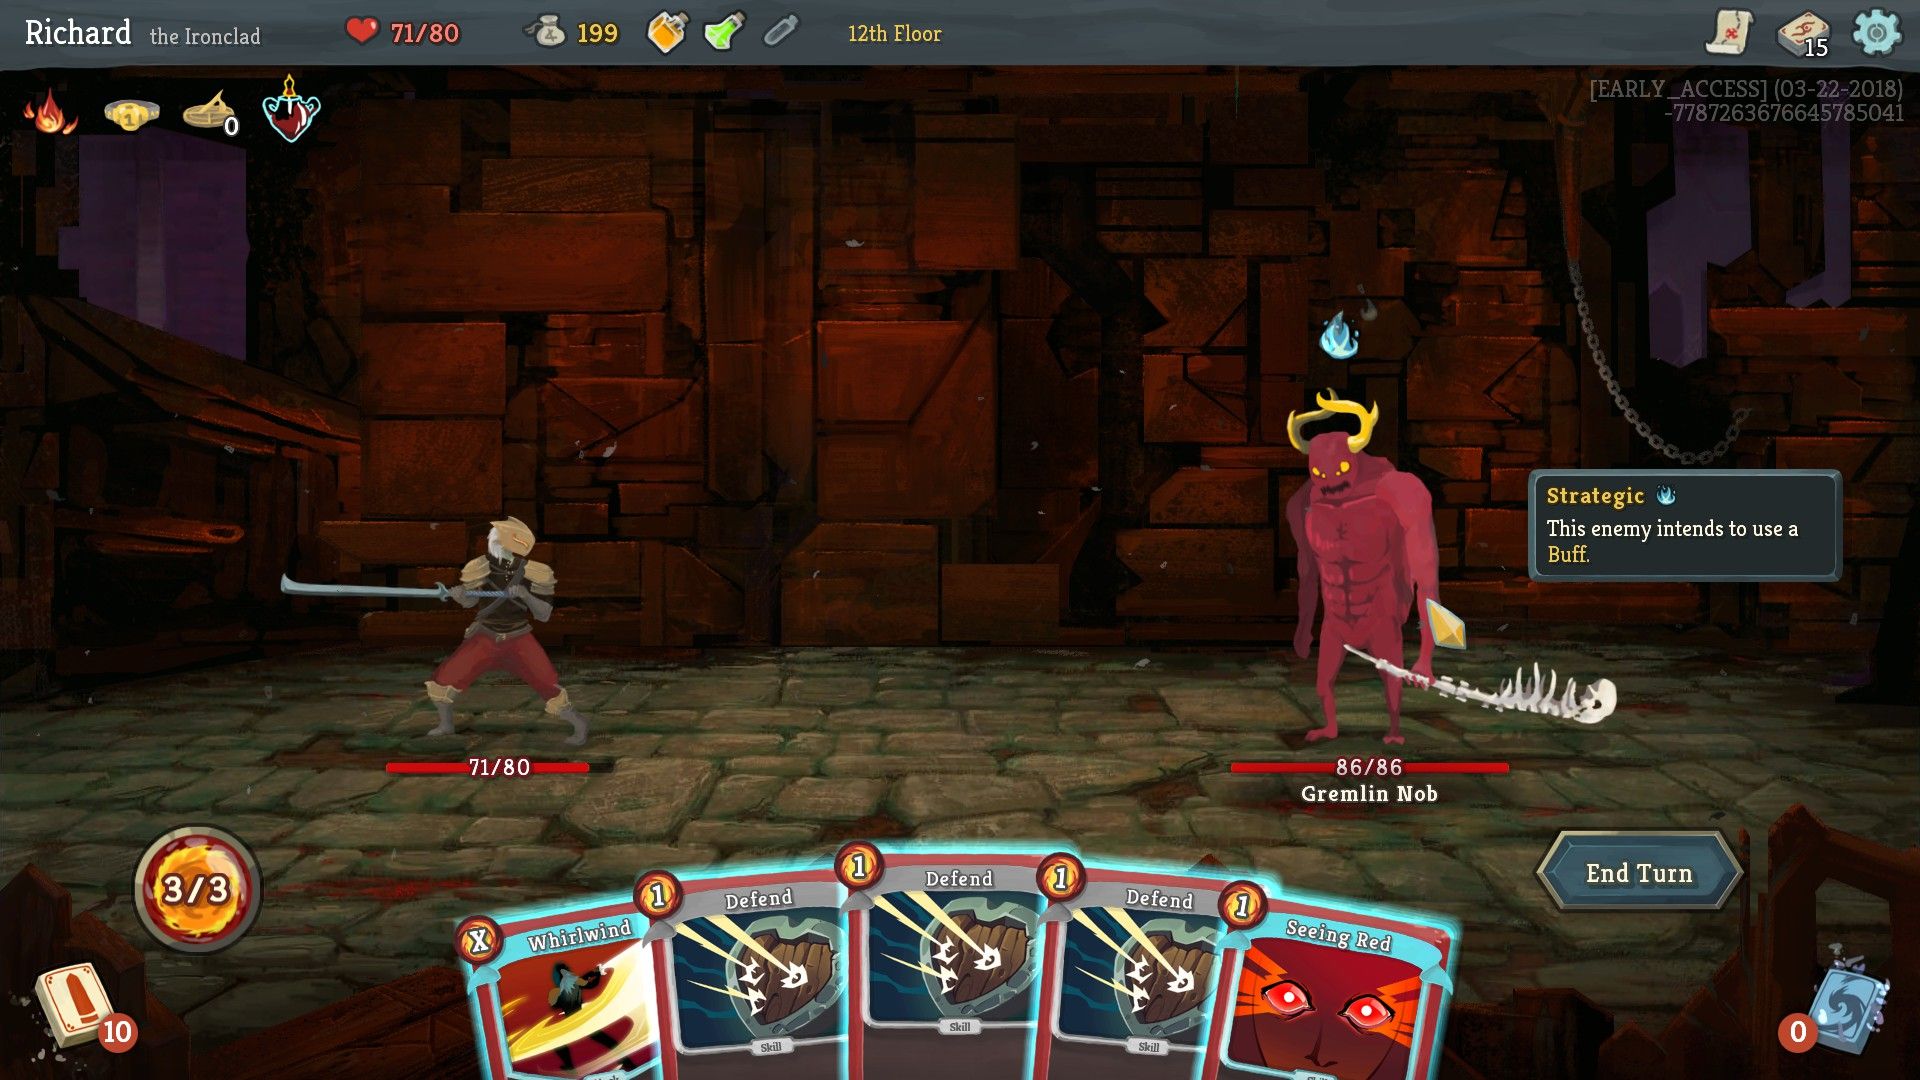 slay the spire characters